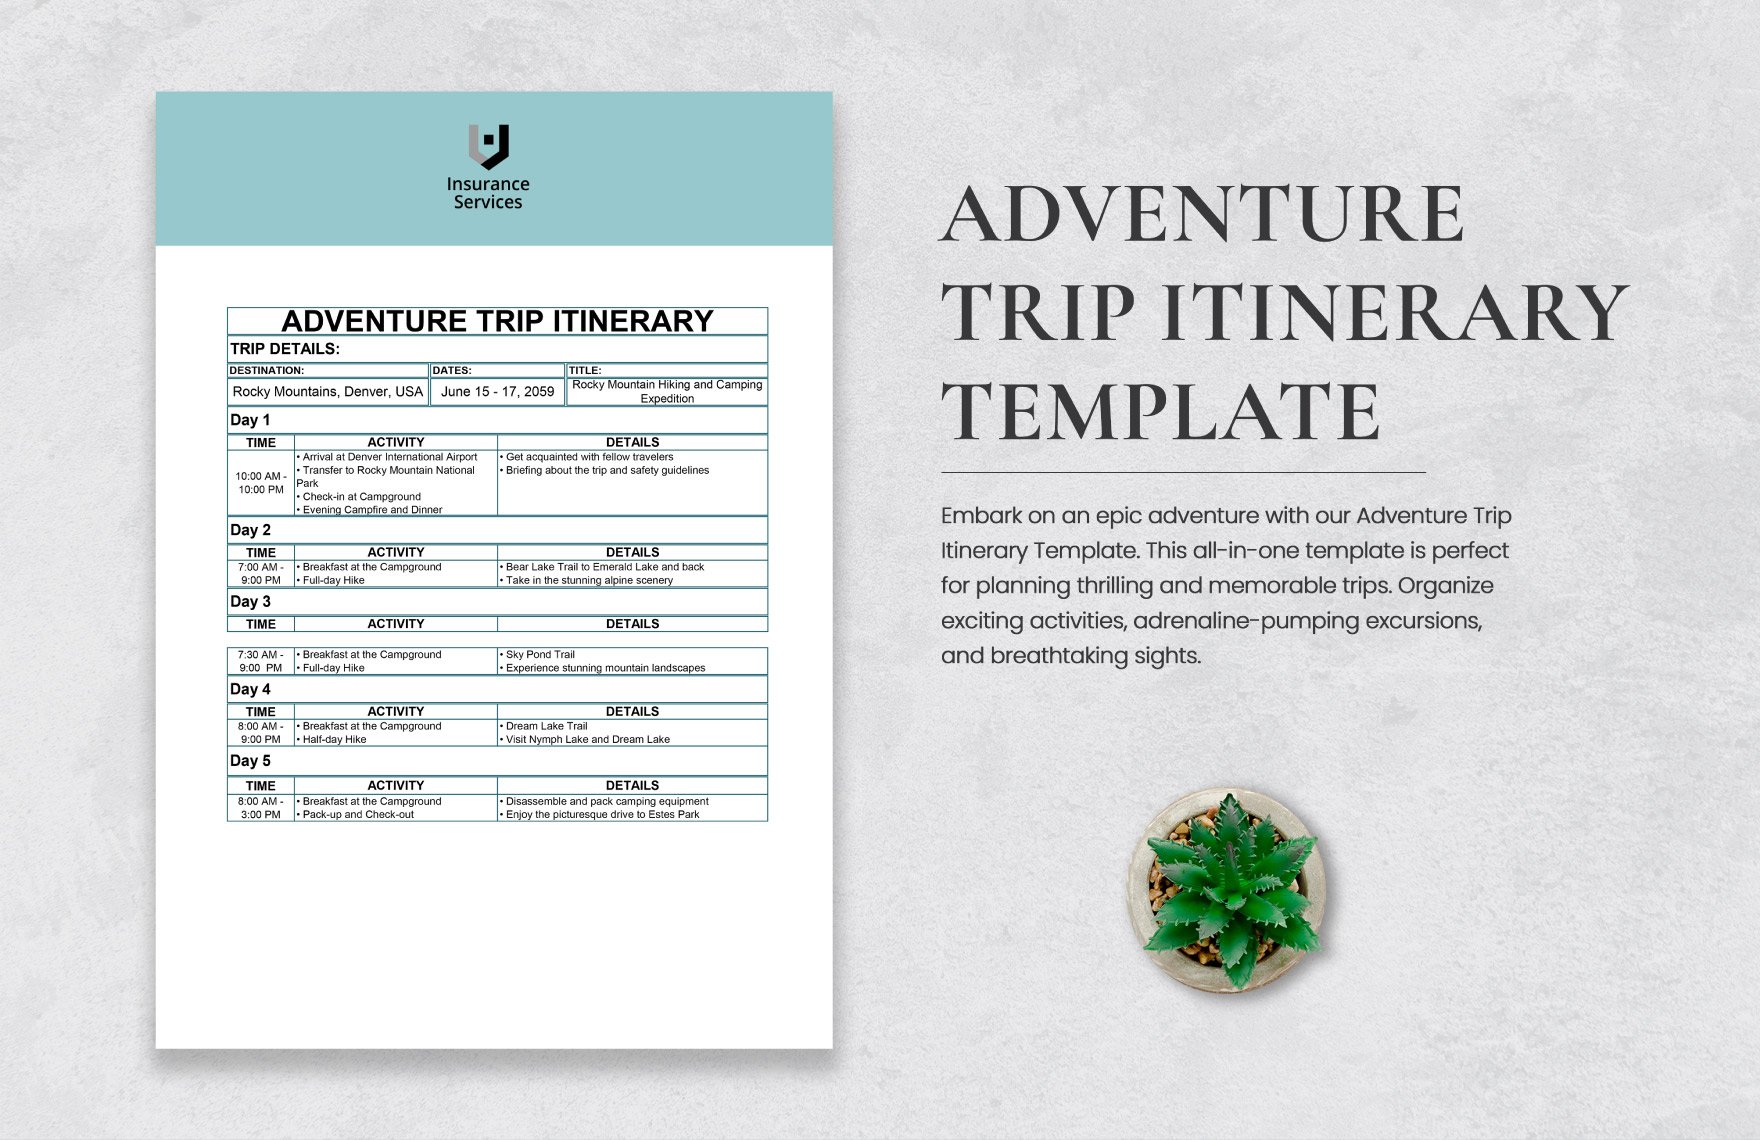 Adventure Trip Itinerary Template